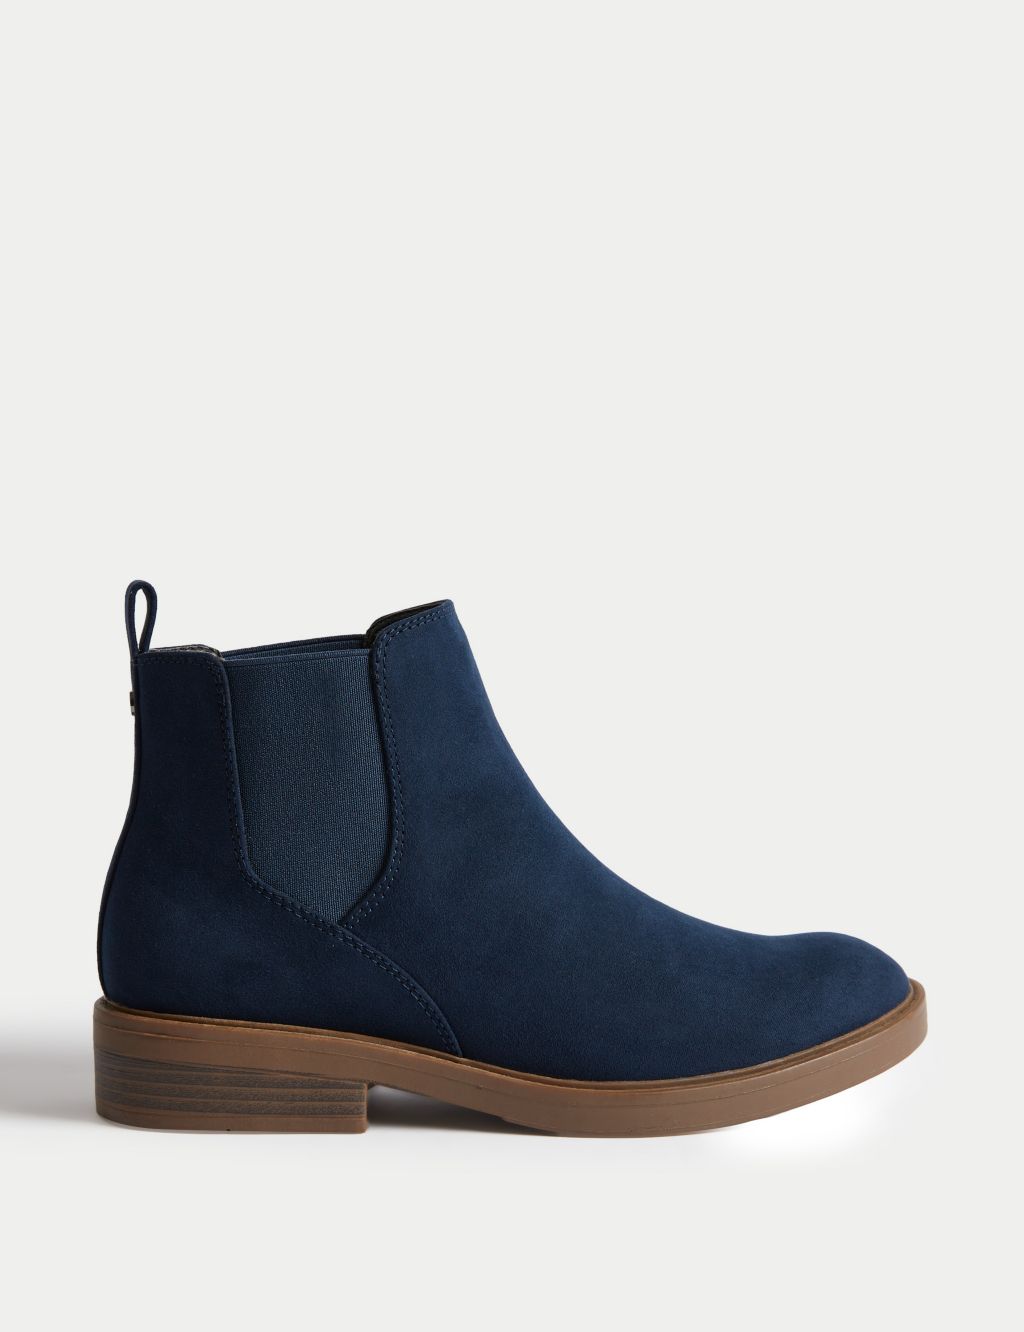 Chelsea Ankle Boots image 1